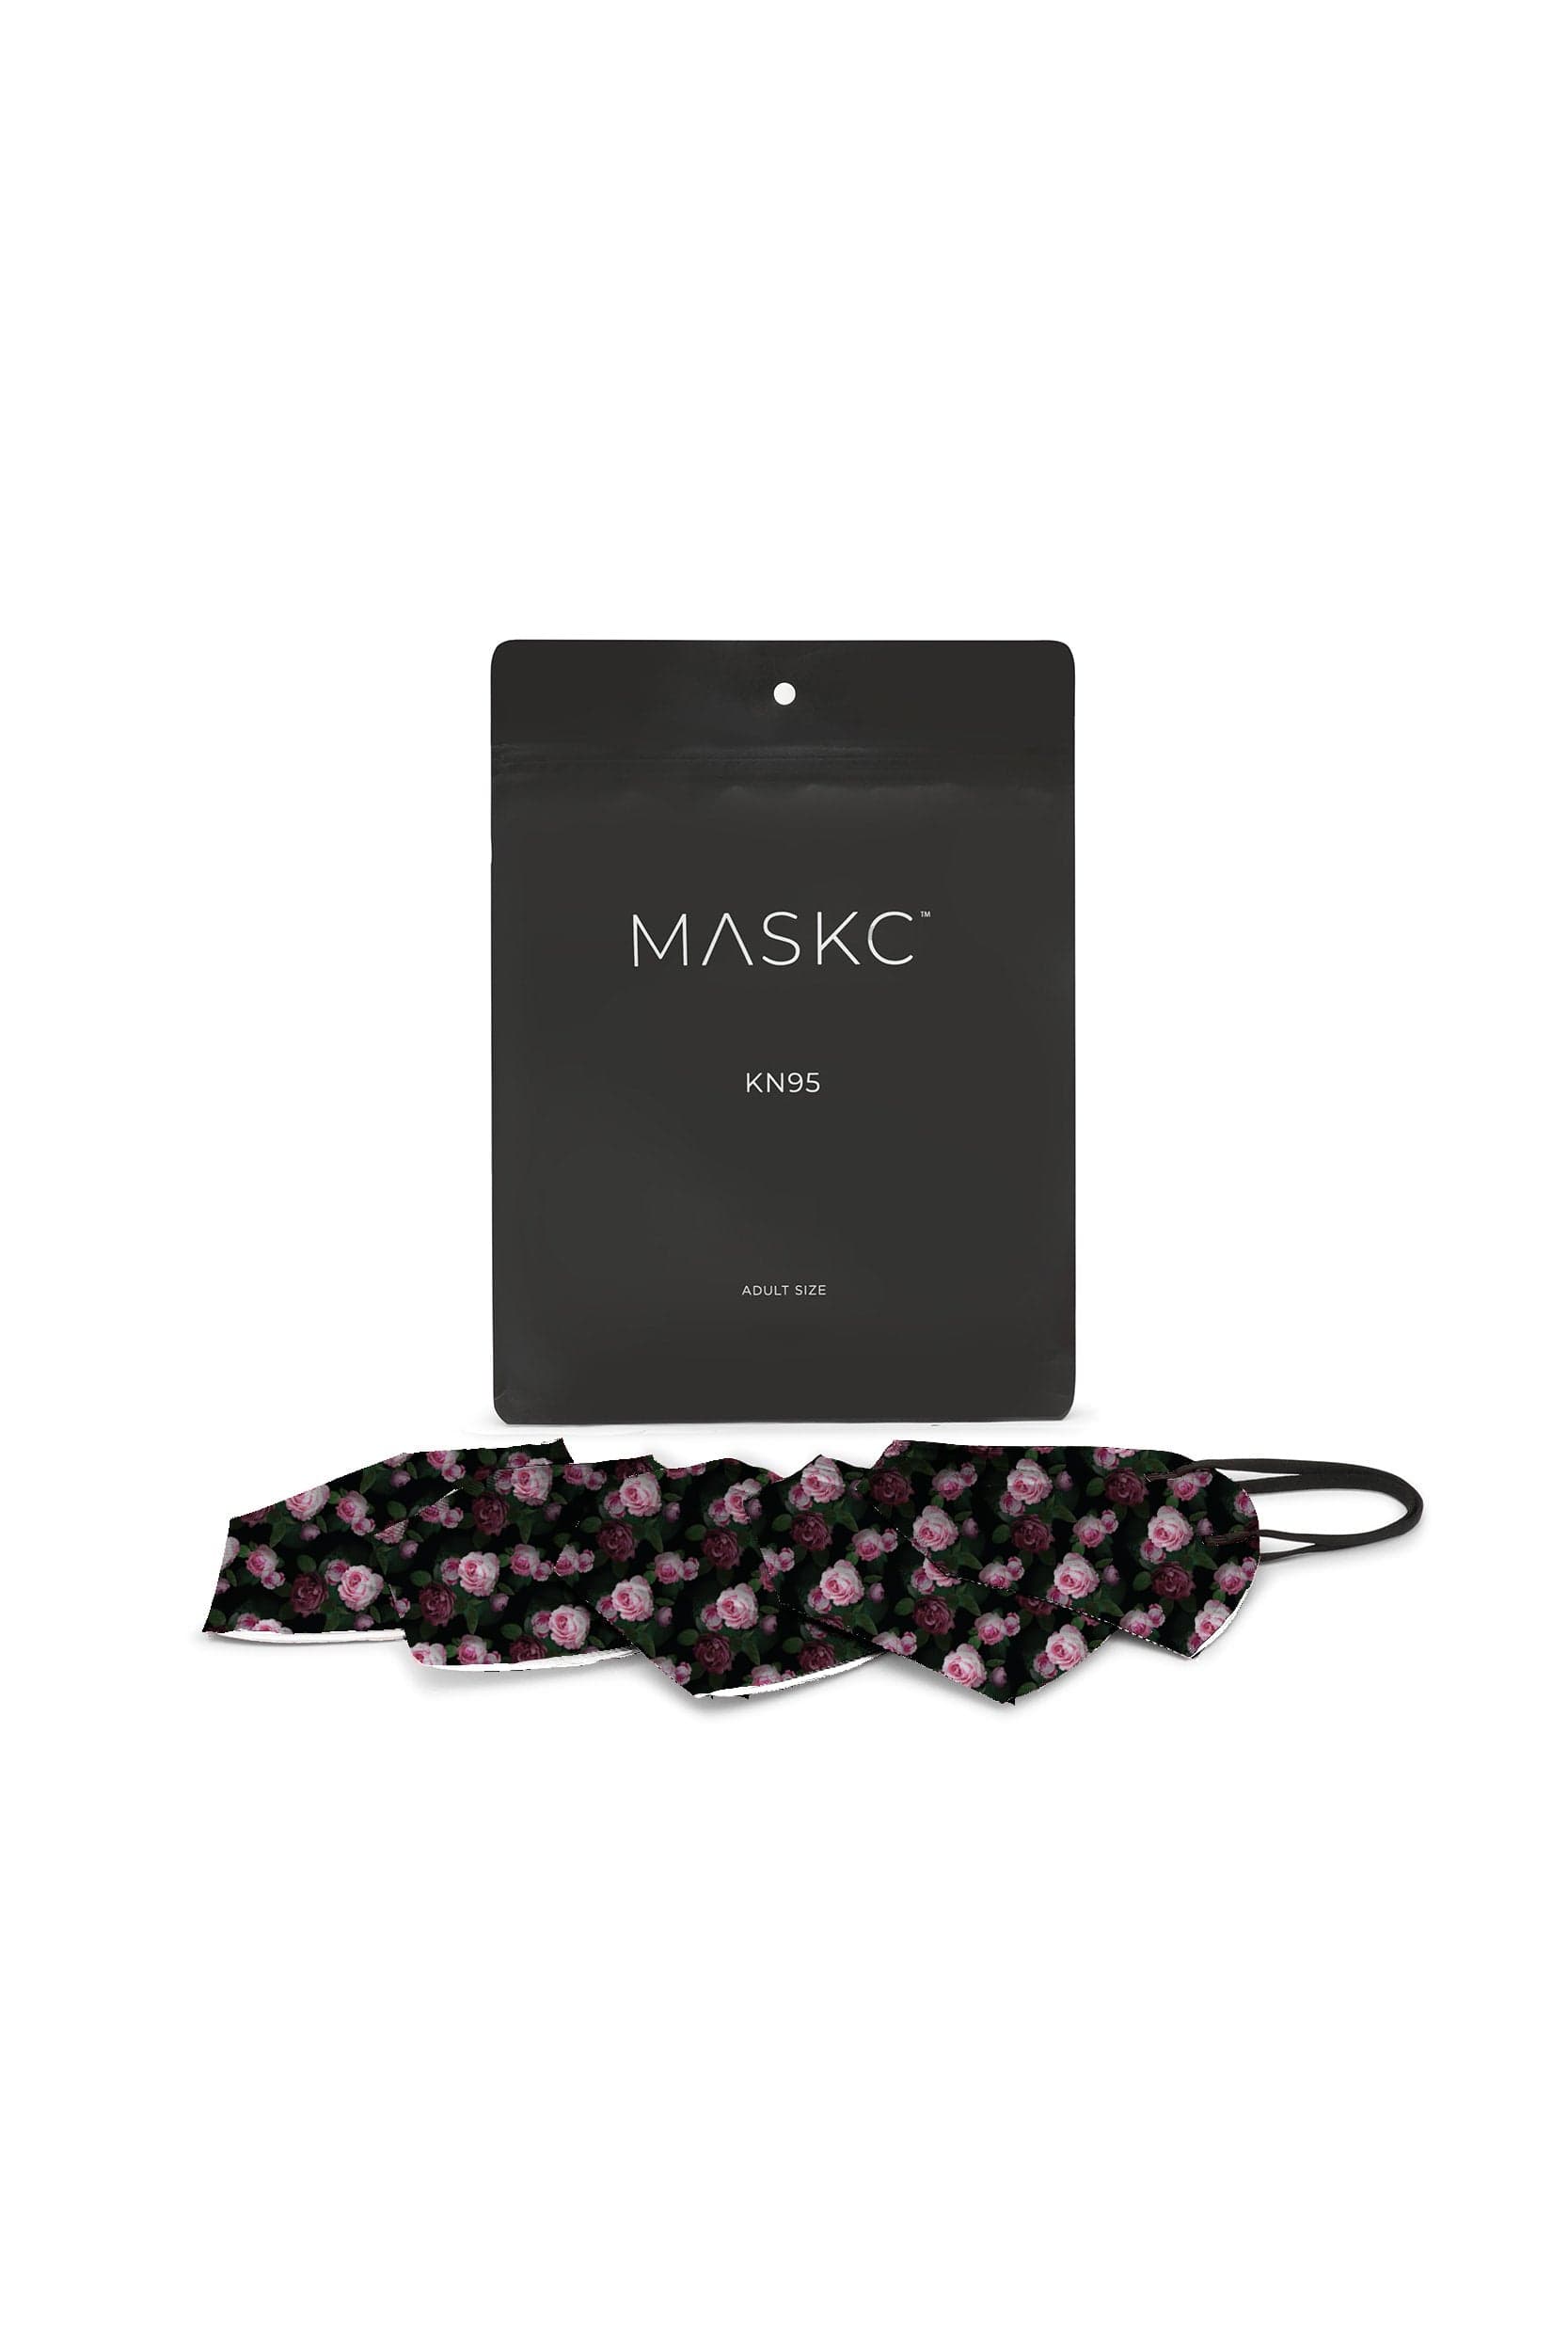 Pack of dark floral printed KN95 face masks. Each pack contains stylish high quality face masks. 